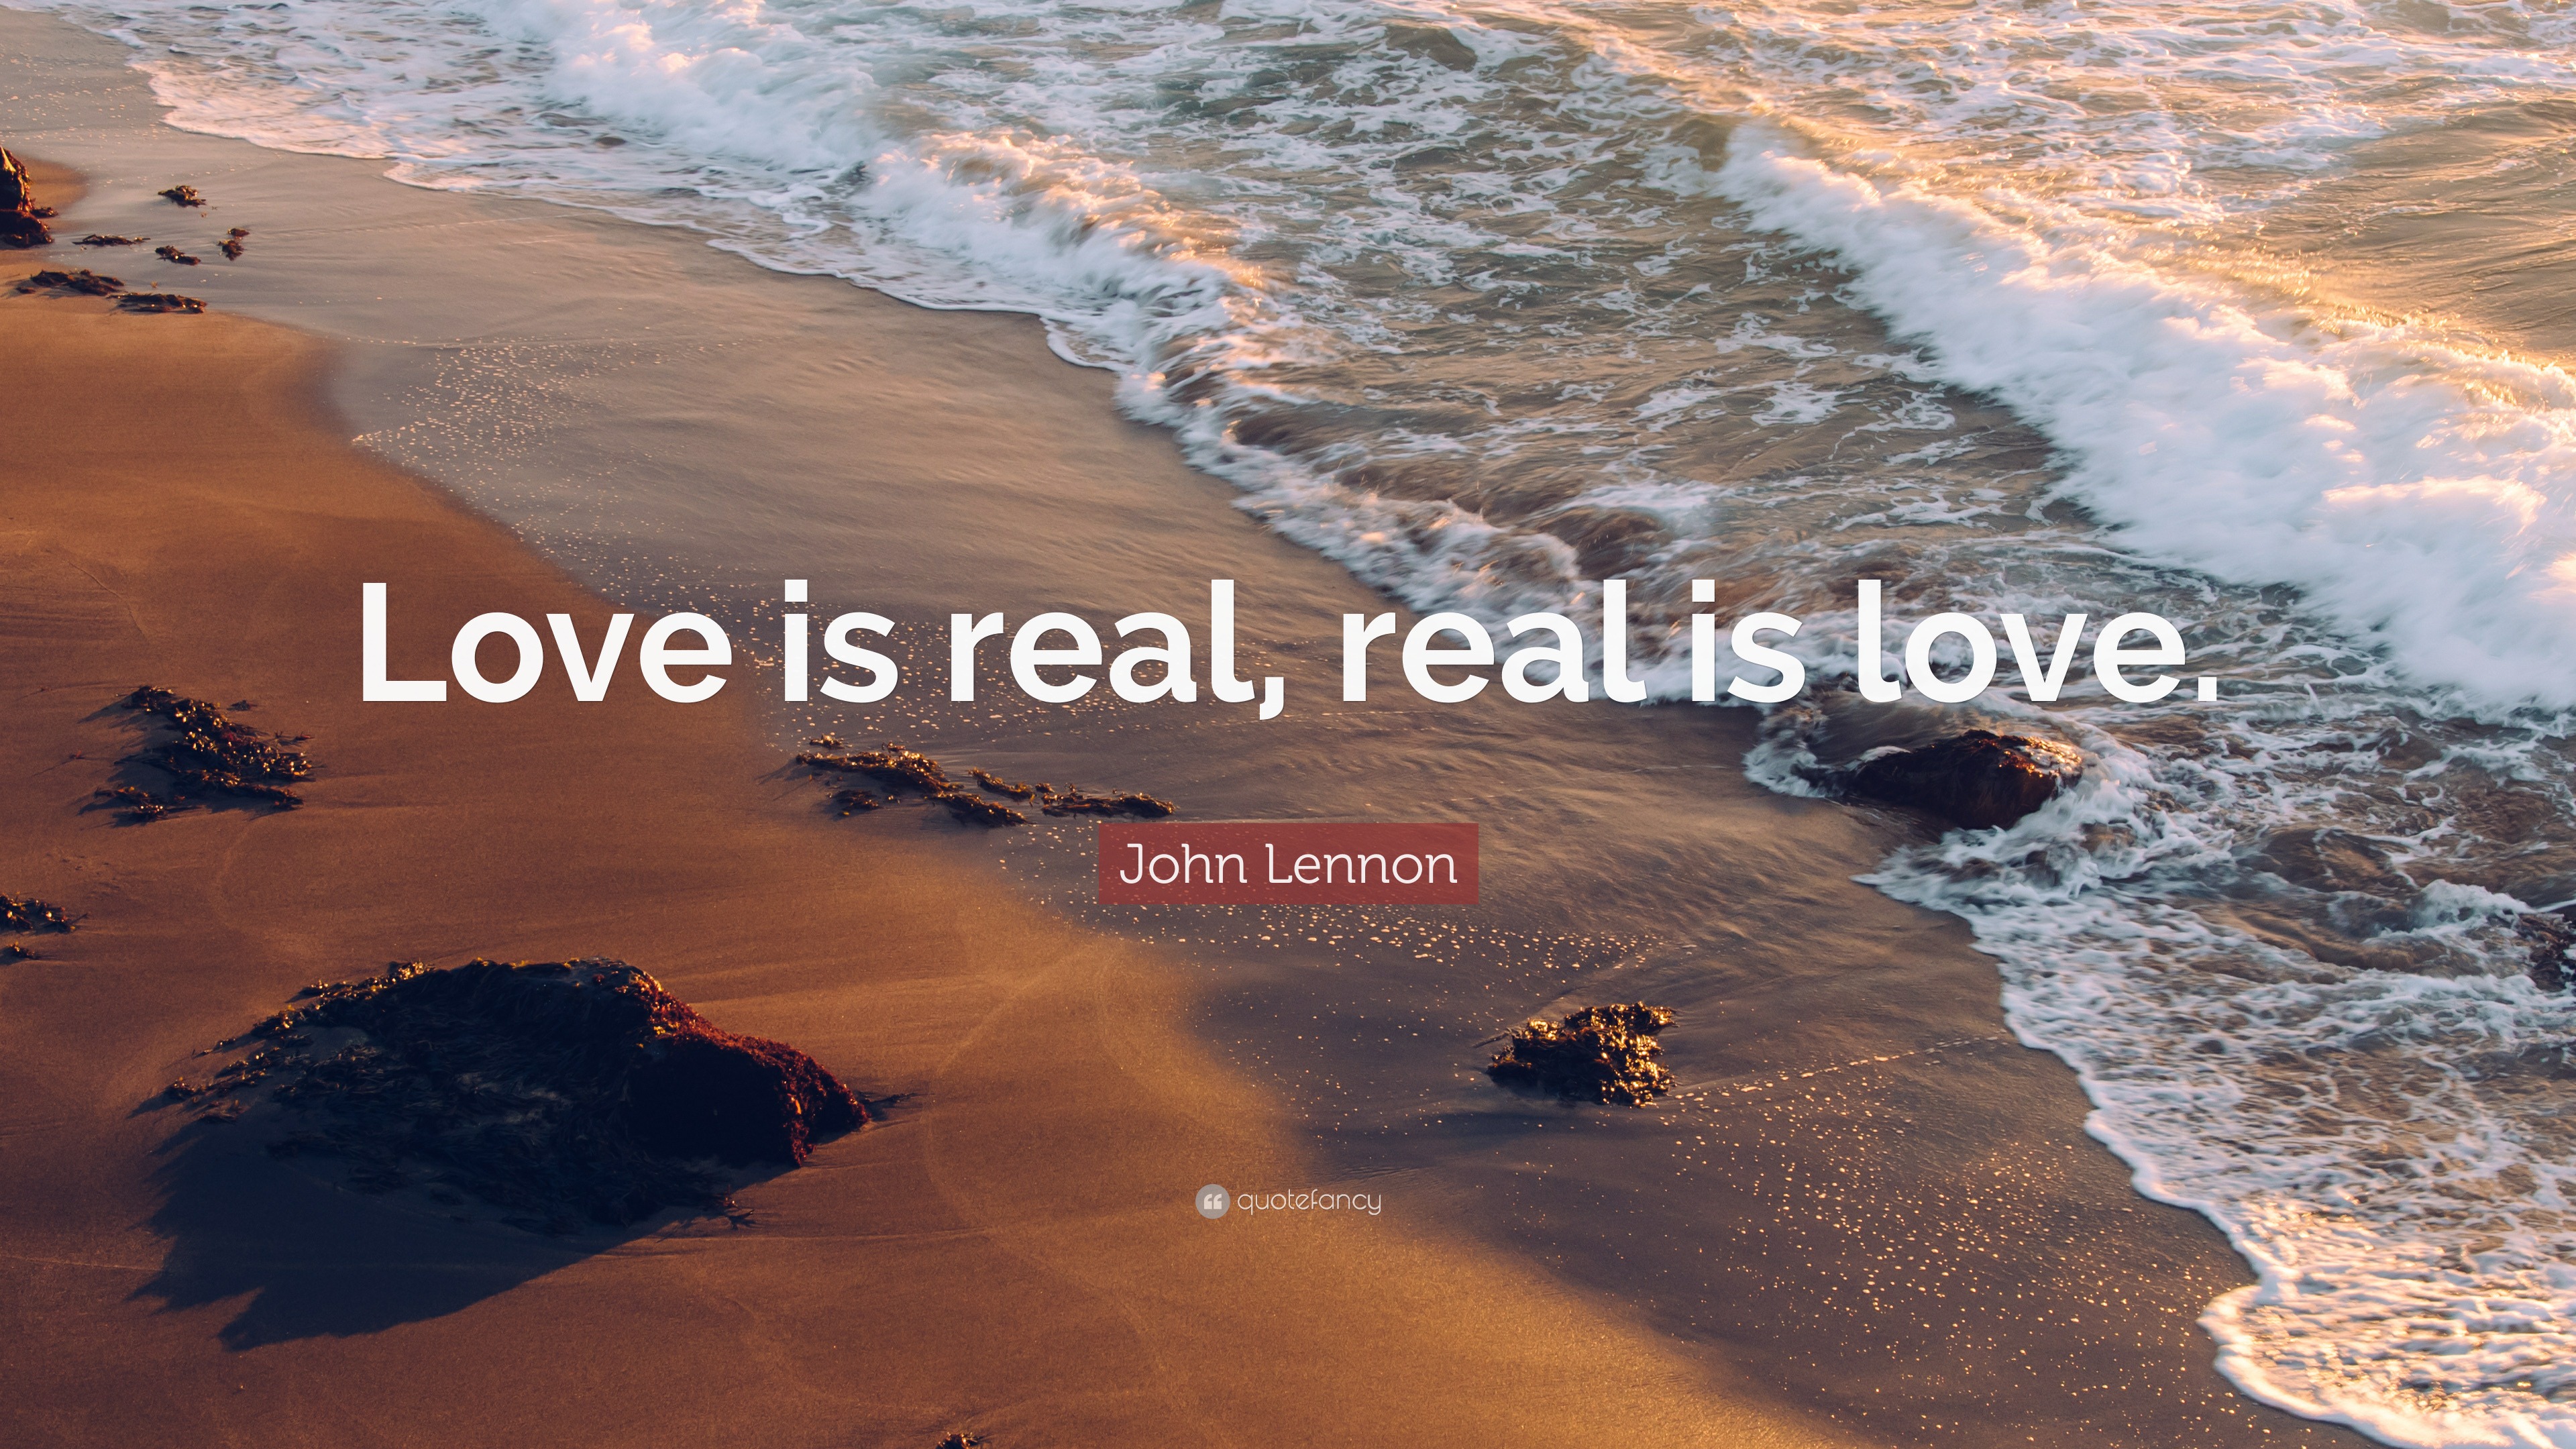 John Lennon Quote: “Love is real, real is love.”